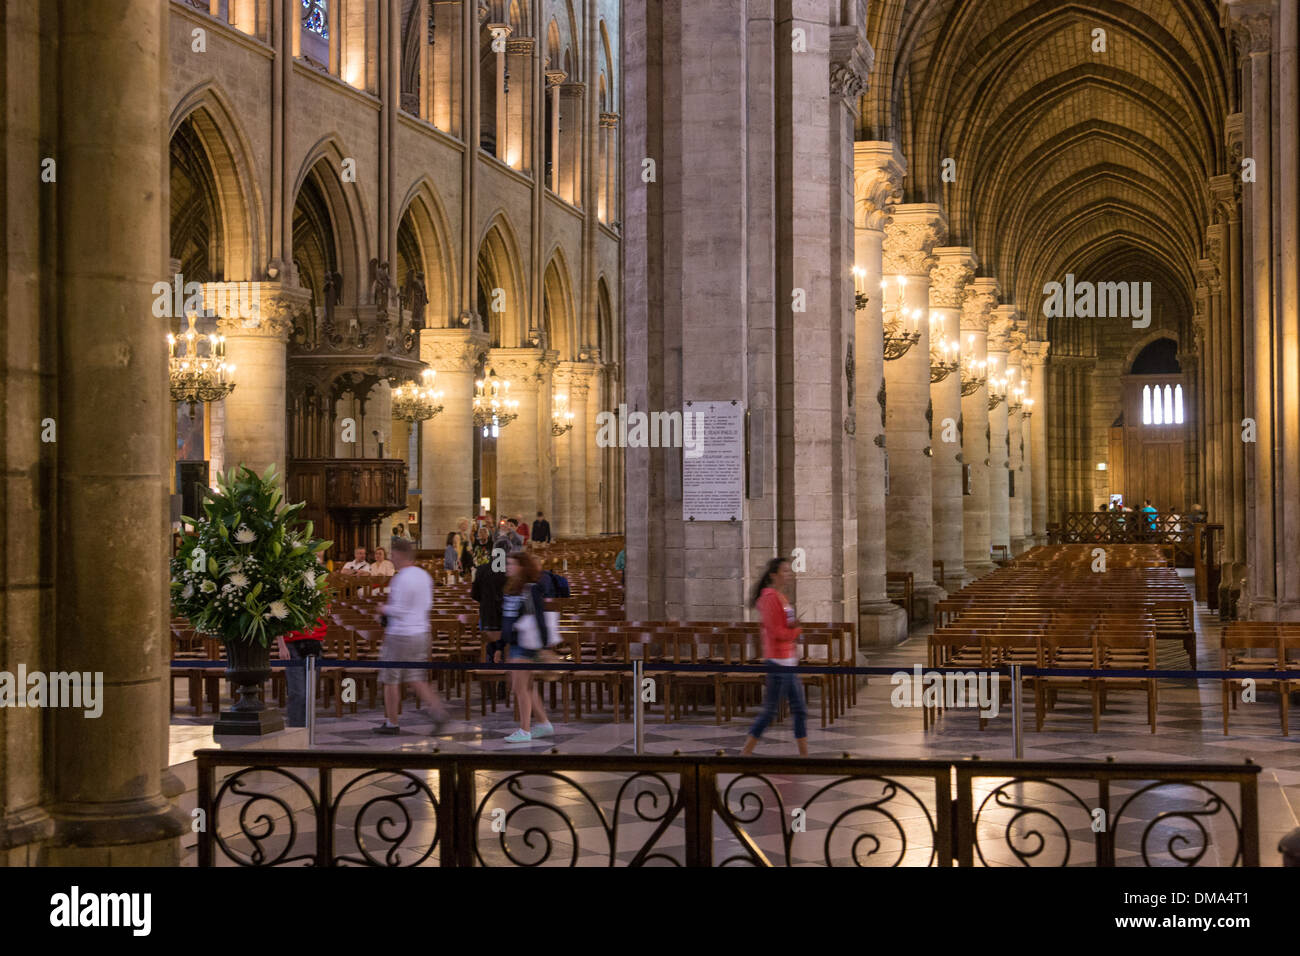 THE VAULTS, NAVE AND AISLES, INTERIOR OF NOTRE DAME CATHEDRAL. SITUATED IN THE HISTORIC CENTRE OF PARIS, THE CATHEDRAL IS THE MOST VISITED MONUMENT IN FRANCE, ILE DE LA CITE, PARIS (75), FRANCE Stock Photo